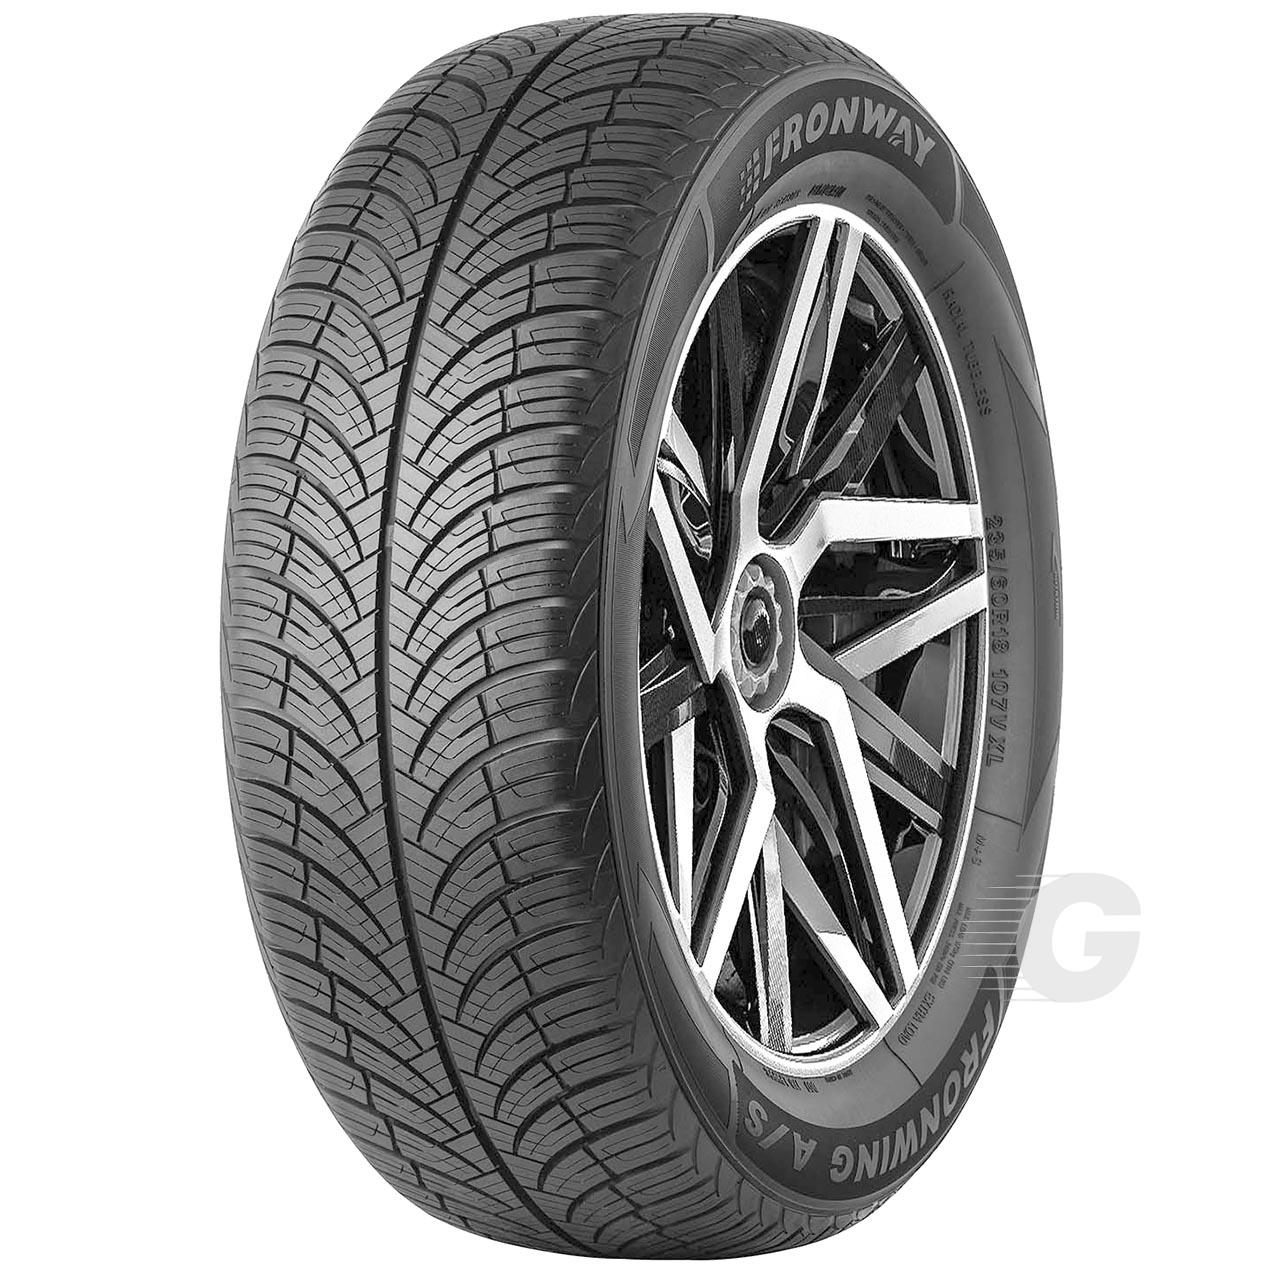 FRONWAY FRONWING AS 155/65R13 73 T